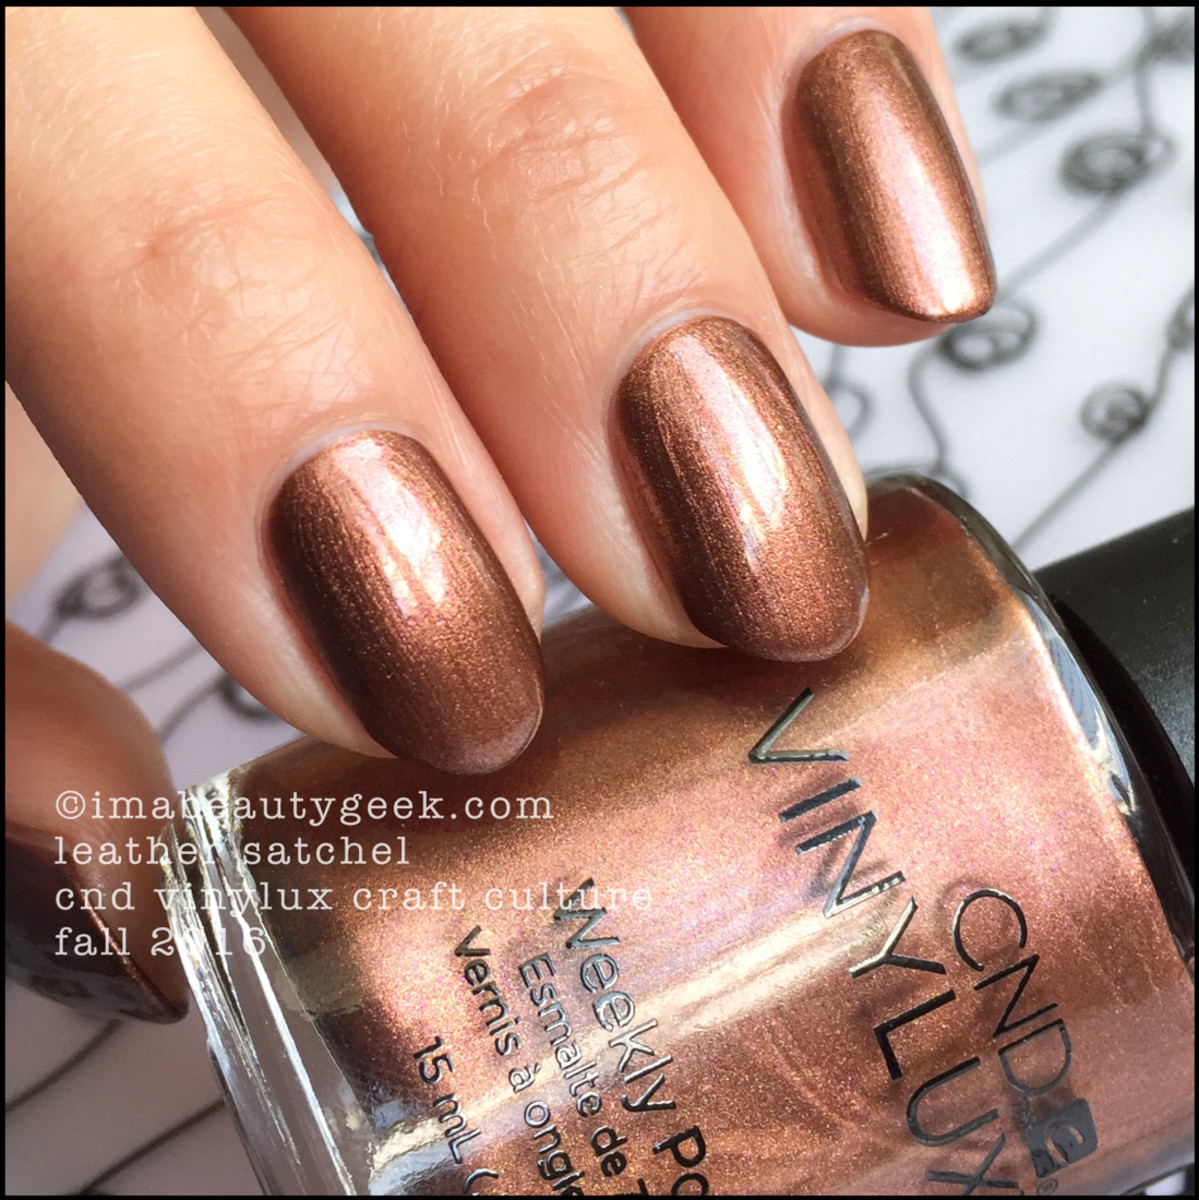 CND Vinylux Leather Satchel_CND Vinylux Craft Culture Collection Swatches Fall 2016